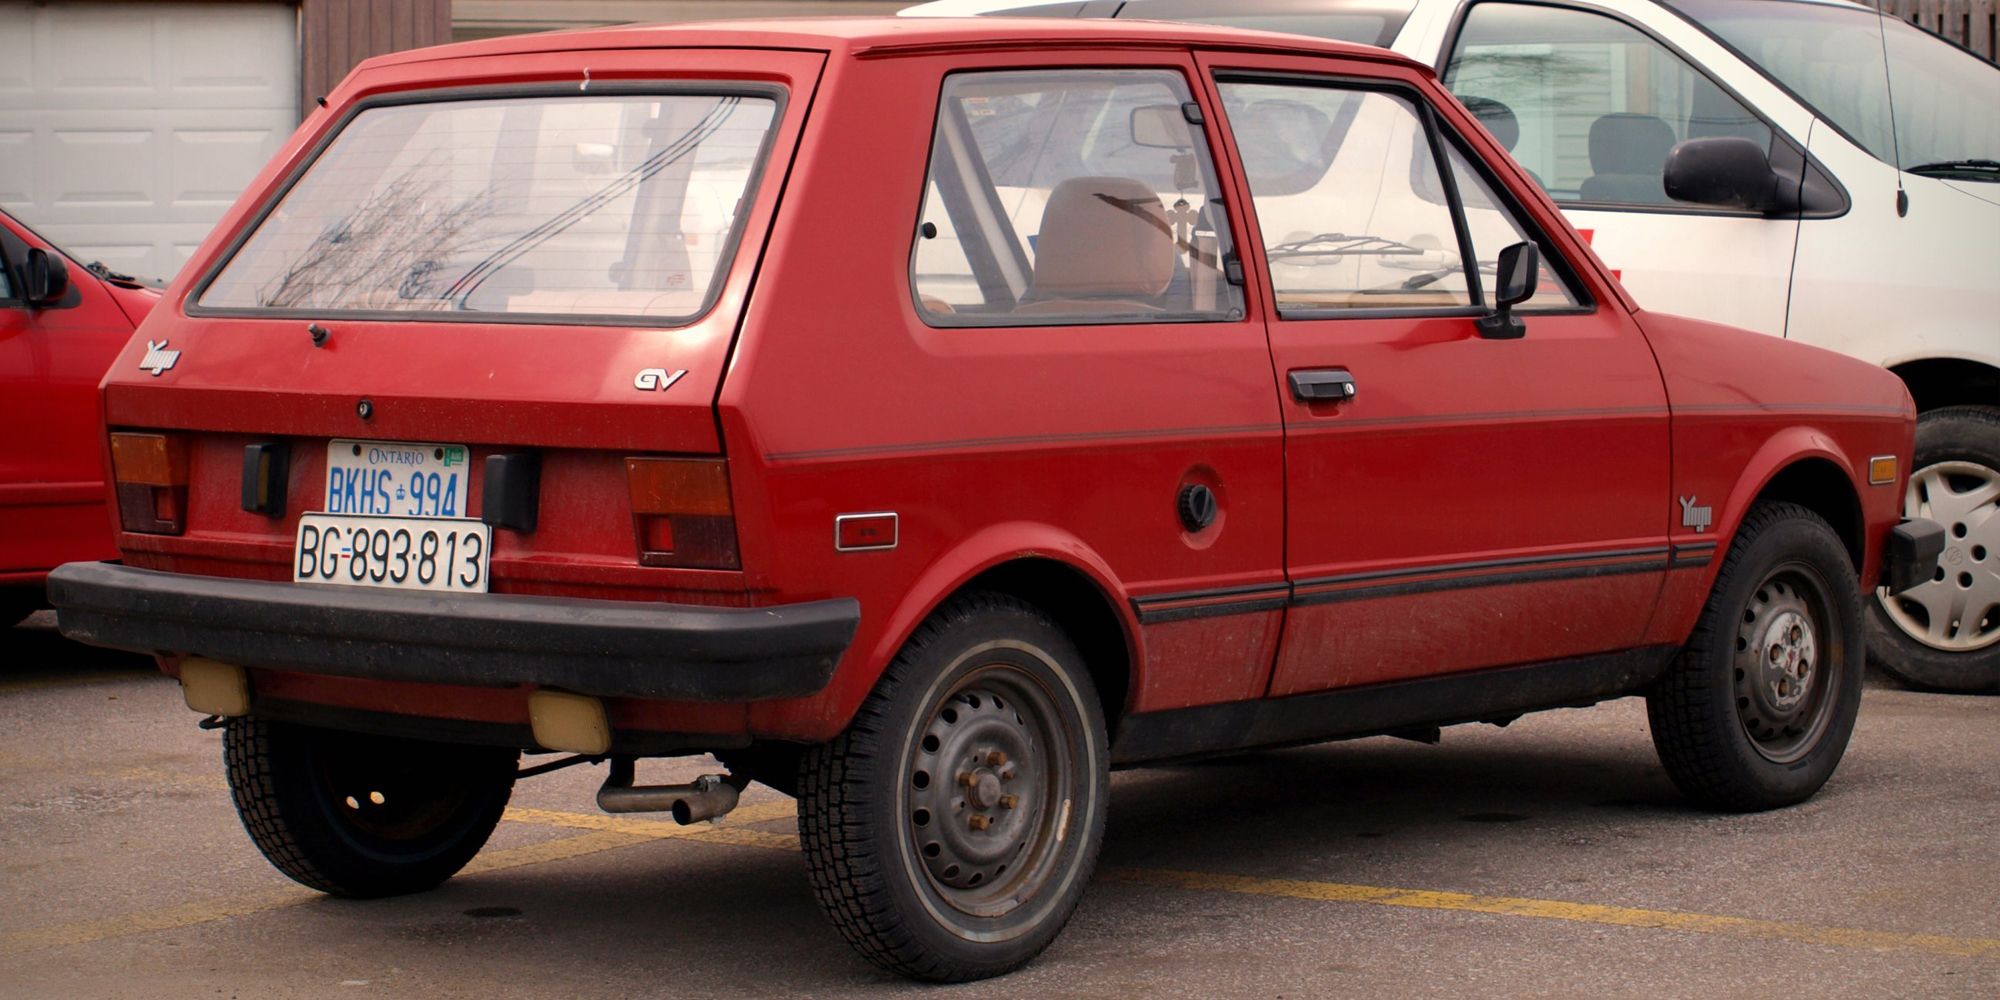 Rear 3/4 view of a red Yugo